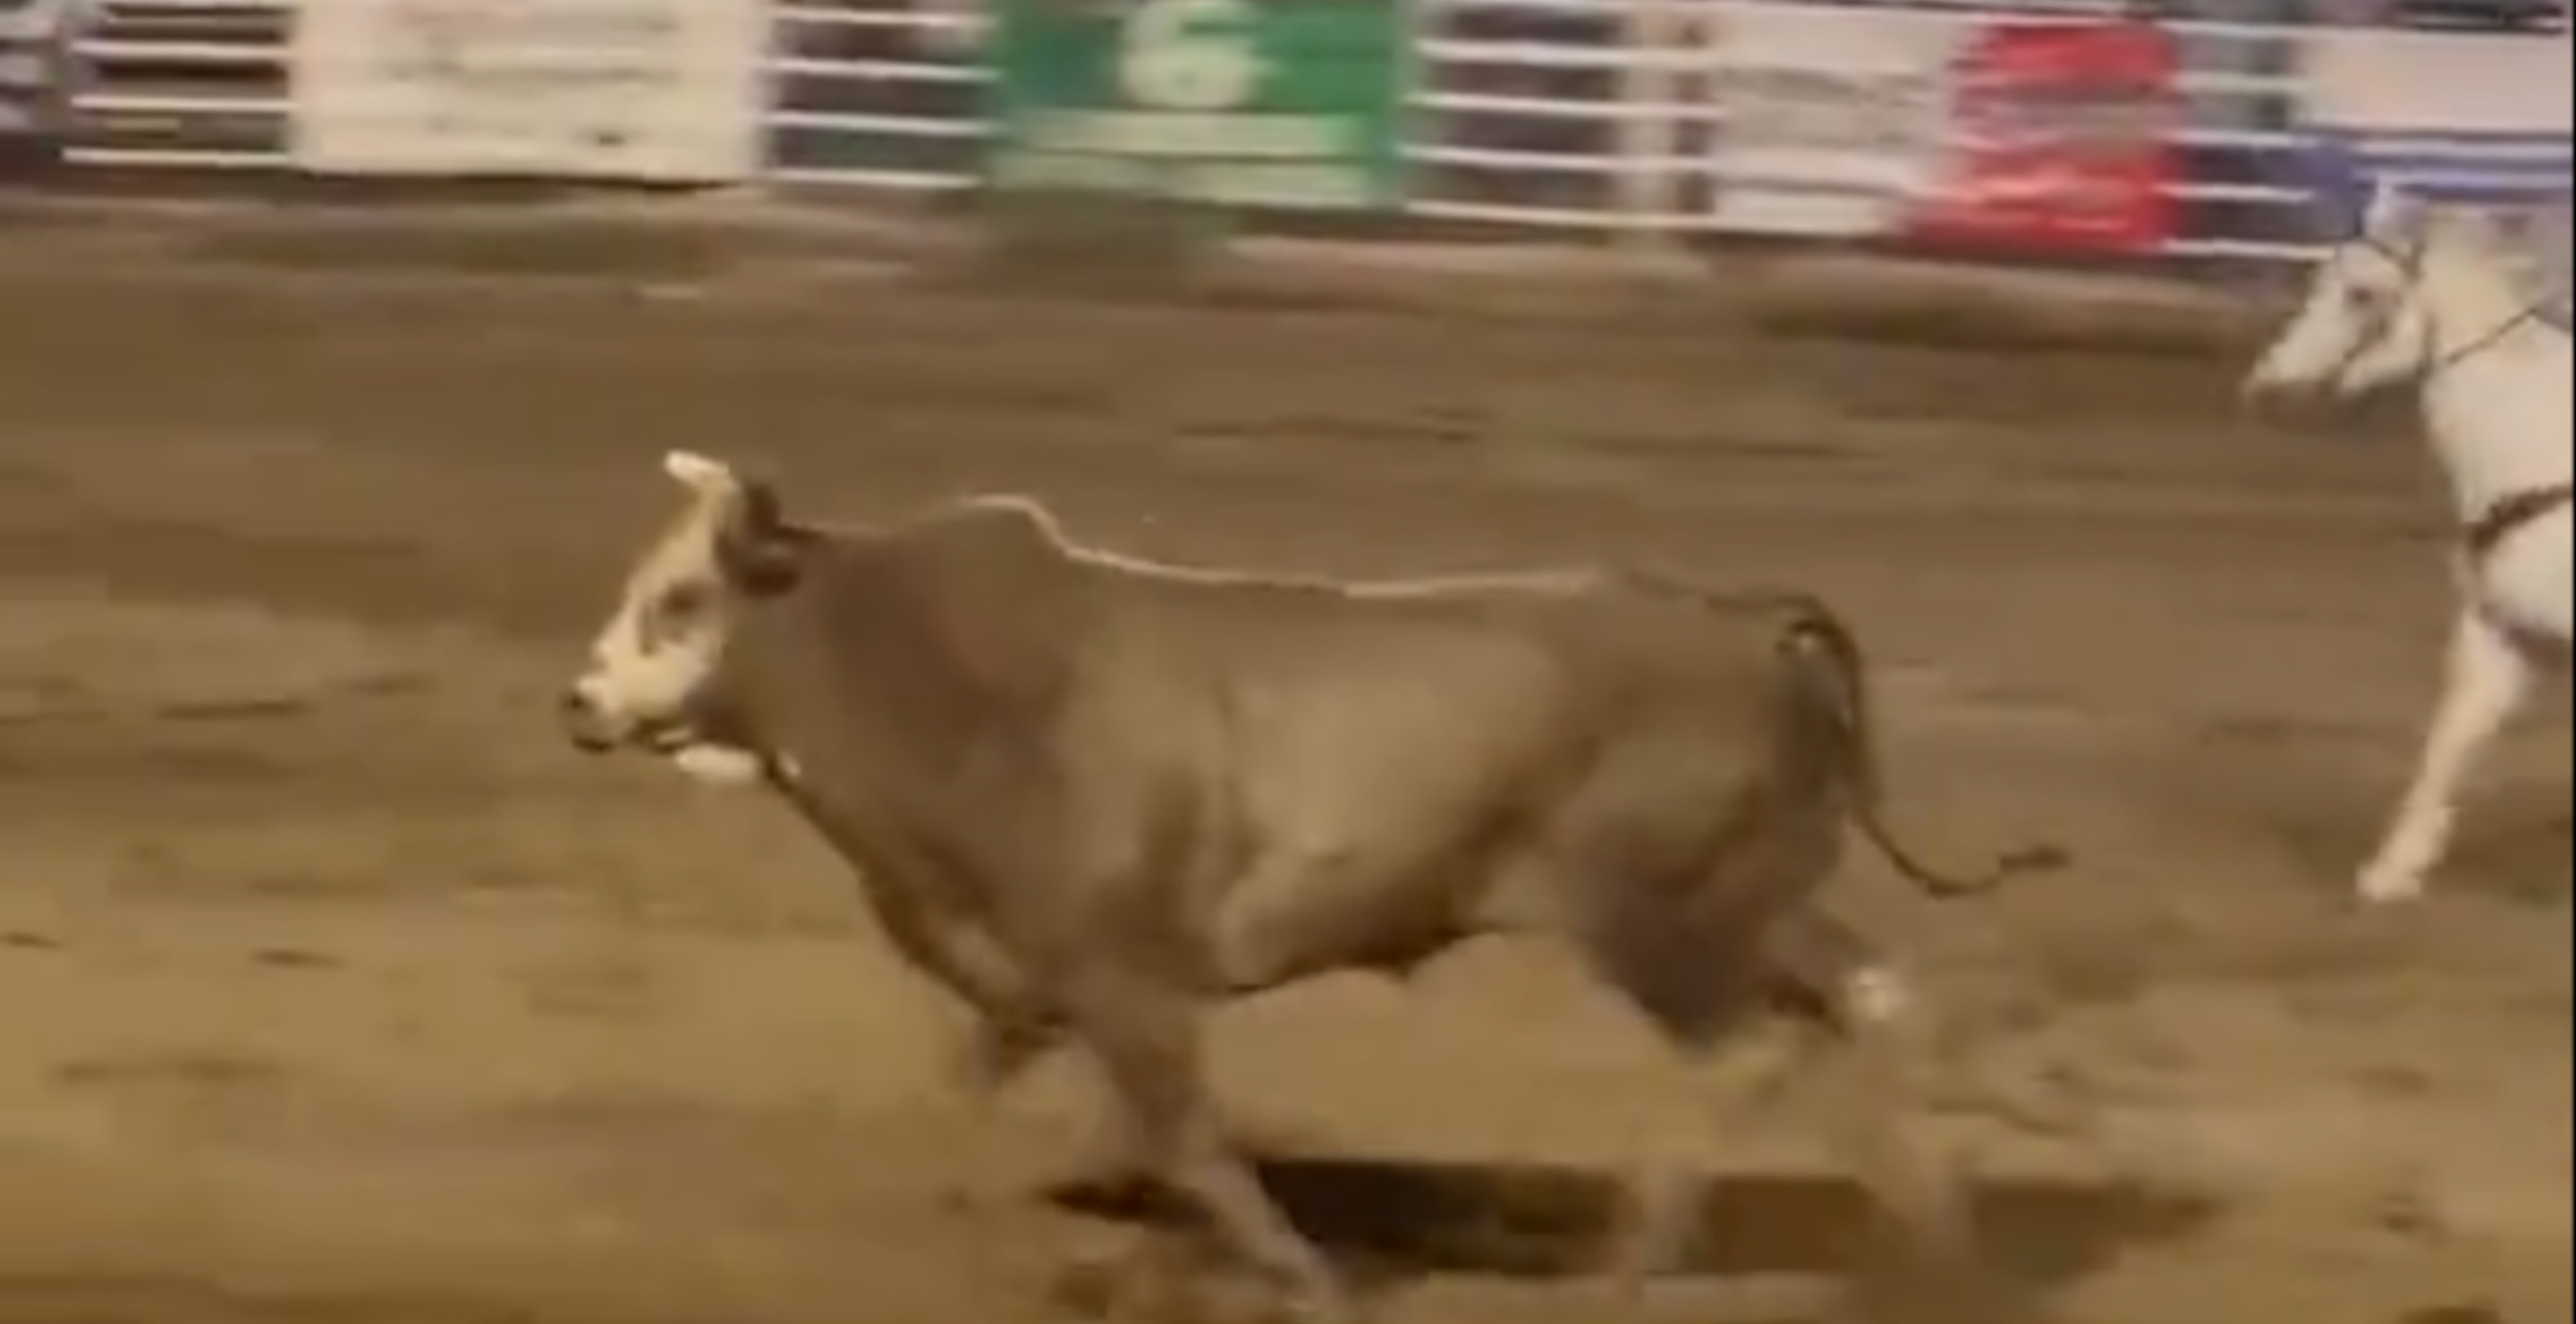 Shocking Video Shows Moment Escaped Bull Smashes Into Rodeo Visitor